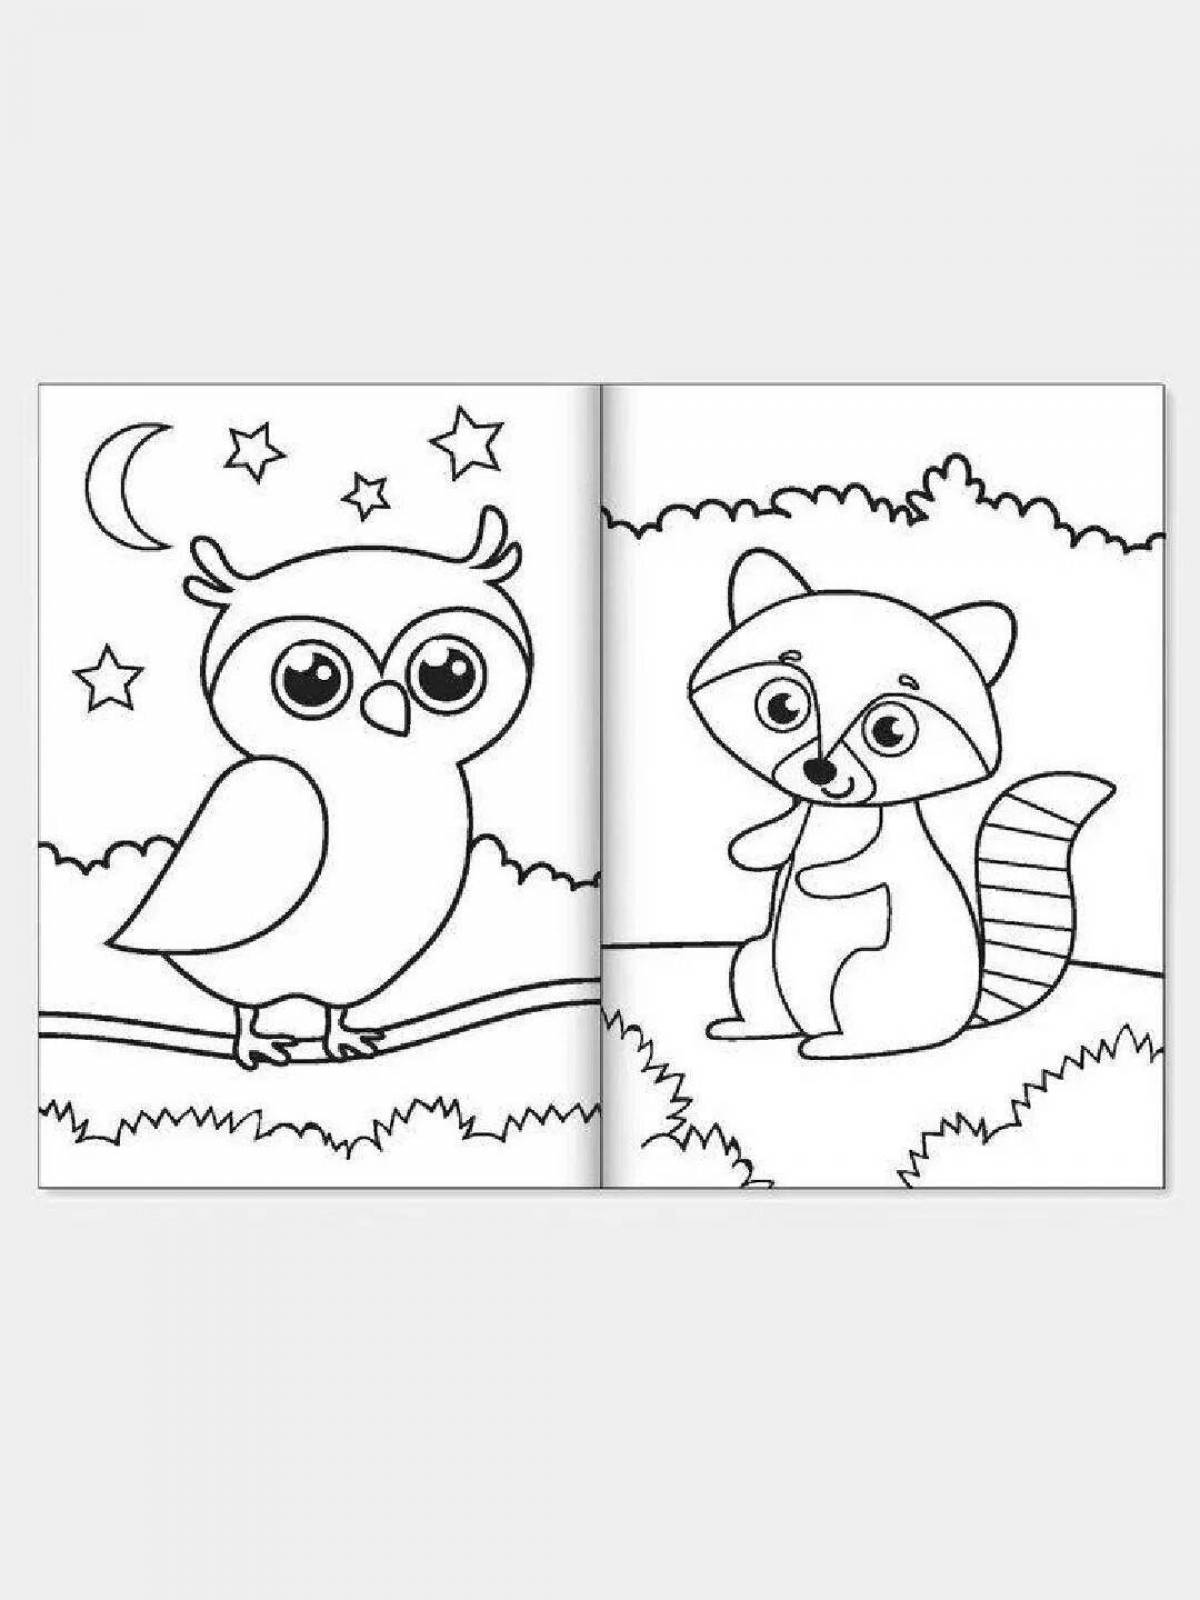 A5 coloring book for kids